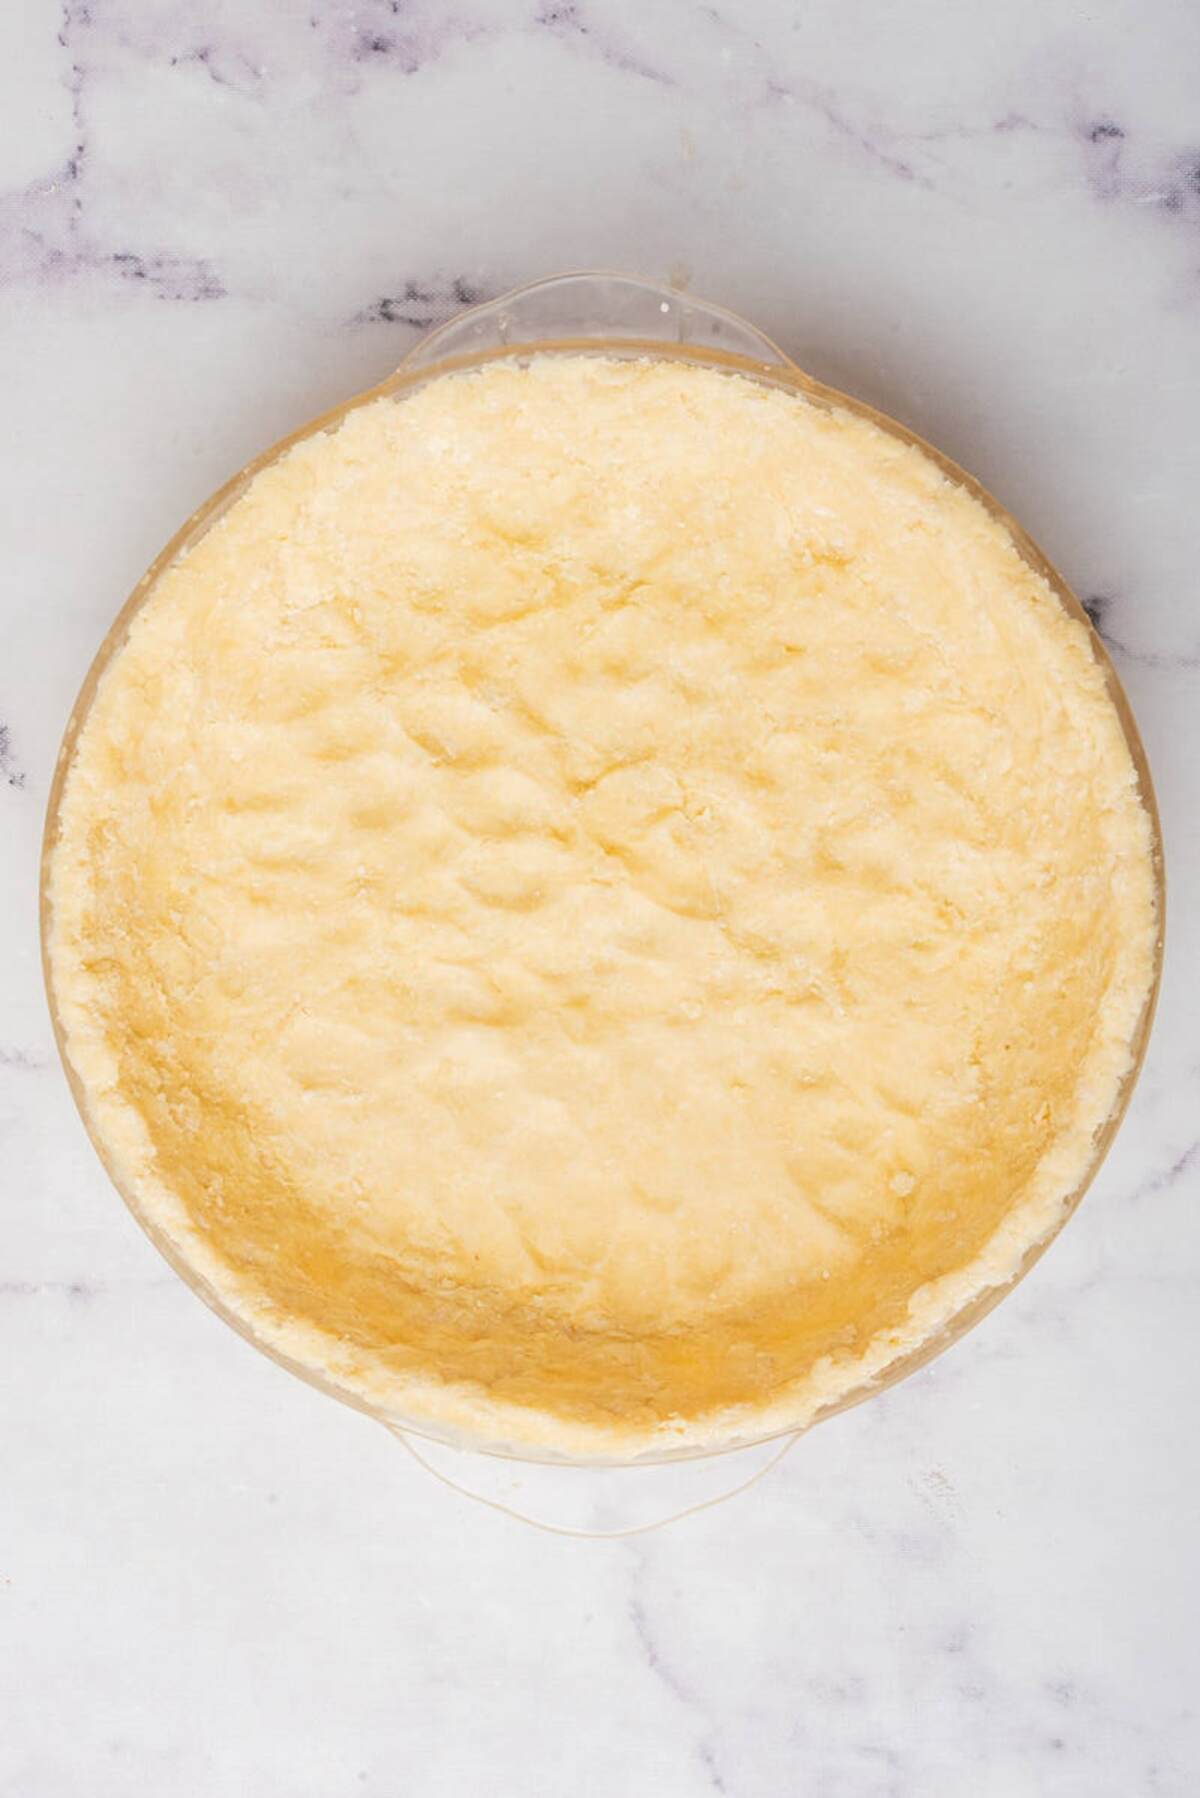 A pie crust in a glass dish, showing the dough neatly pressed and ready for filling.